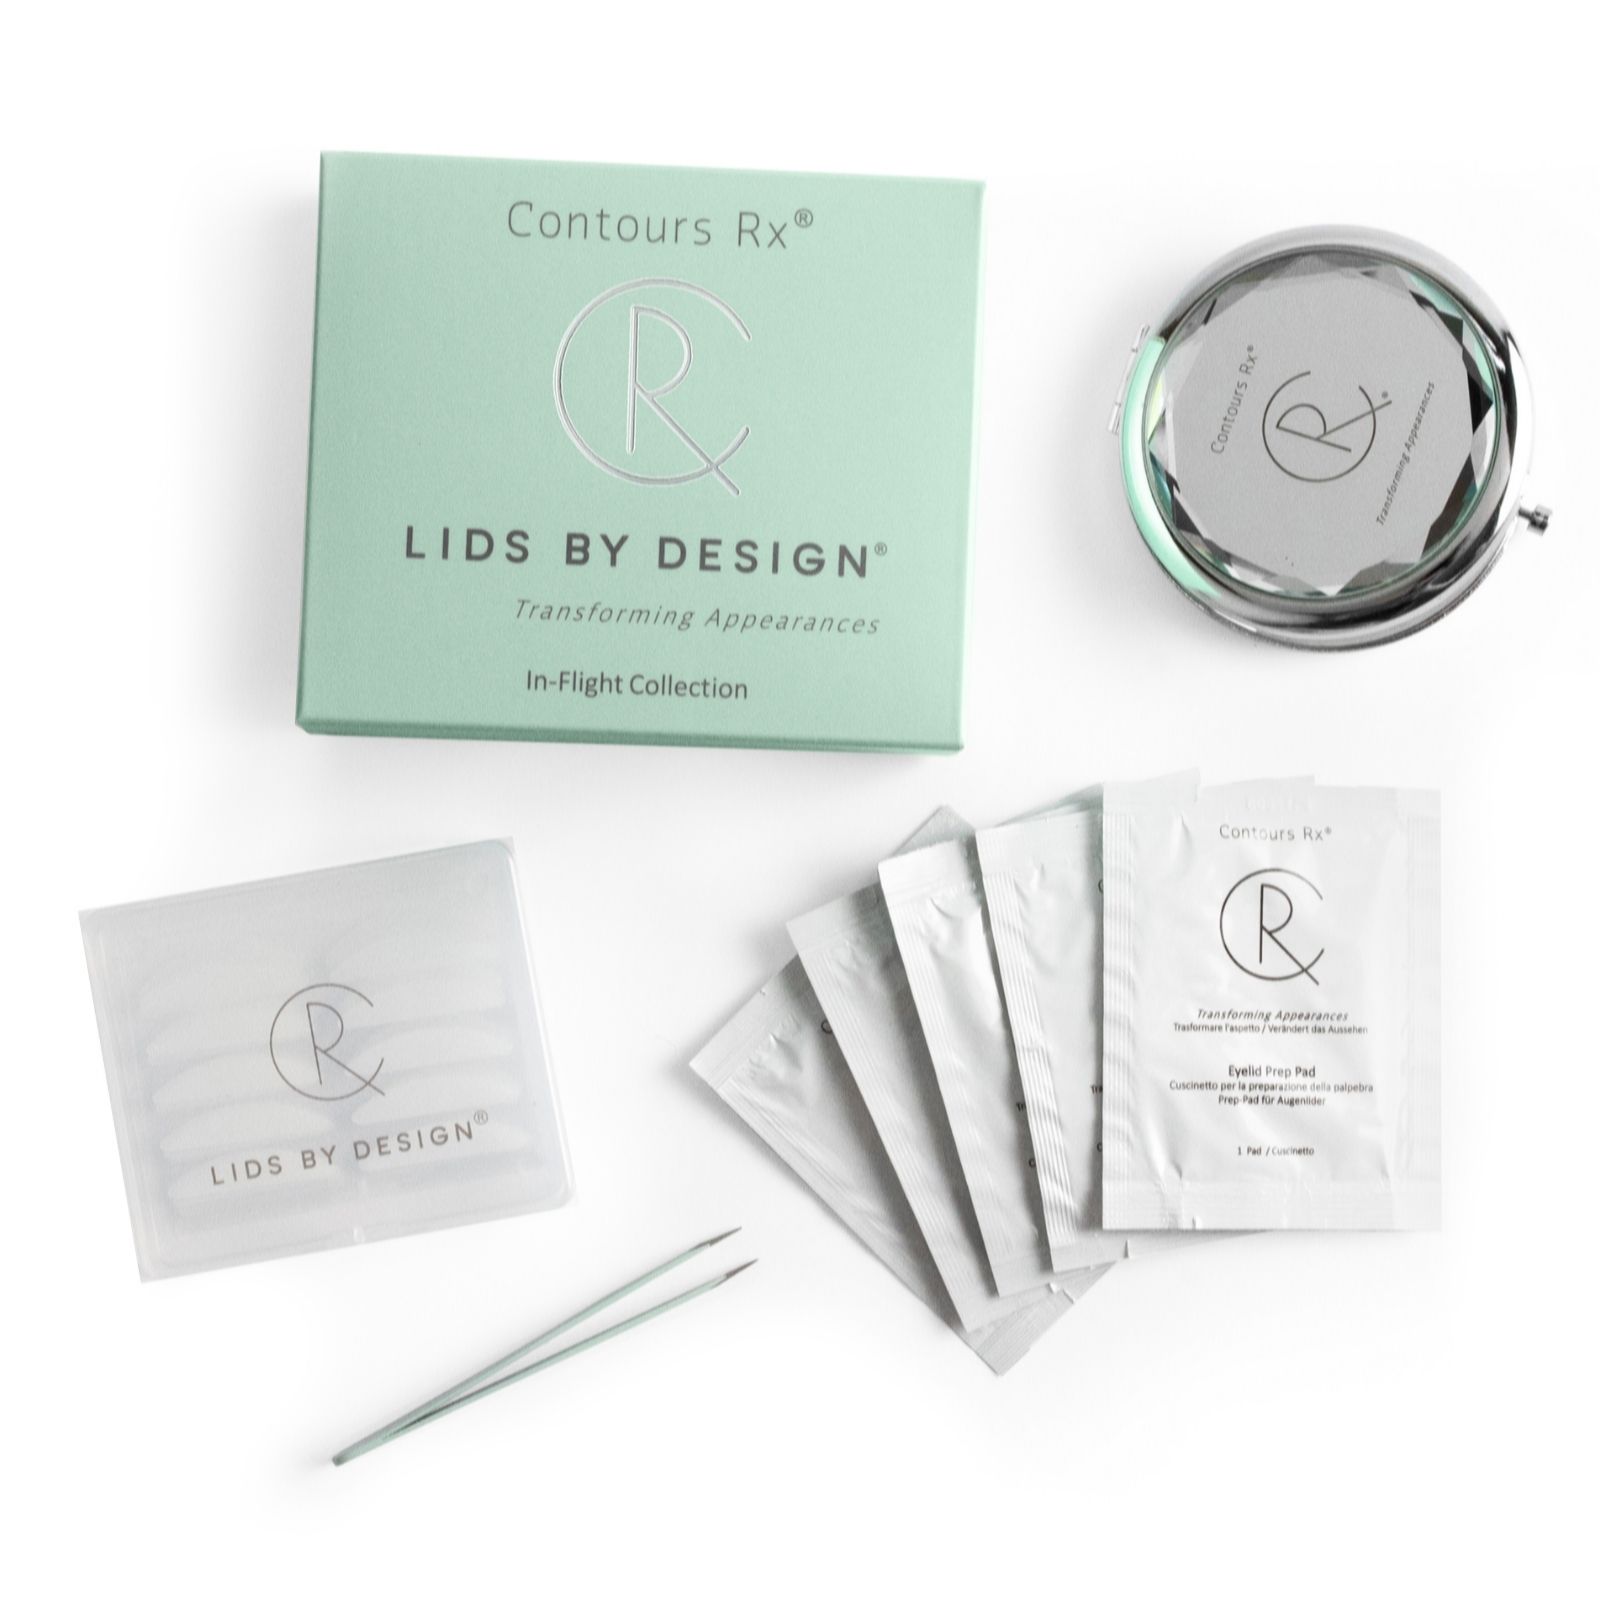 Lids by Design - 80 Cosmetic Strips – Contours Rx